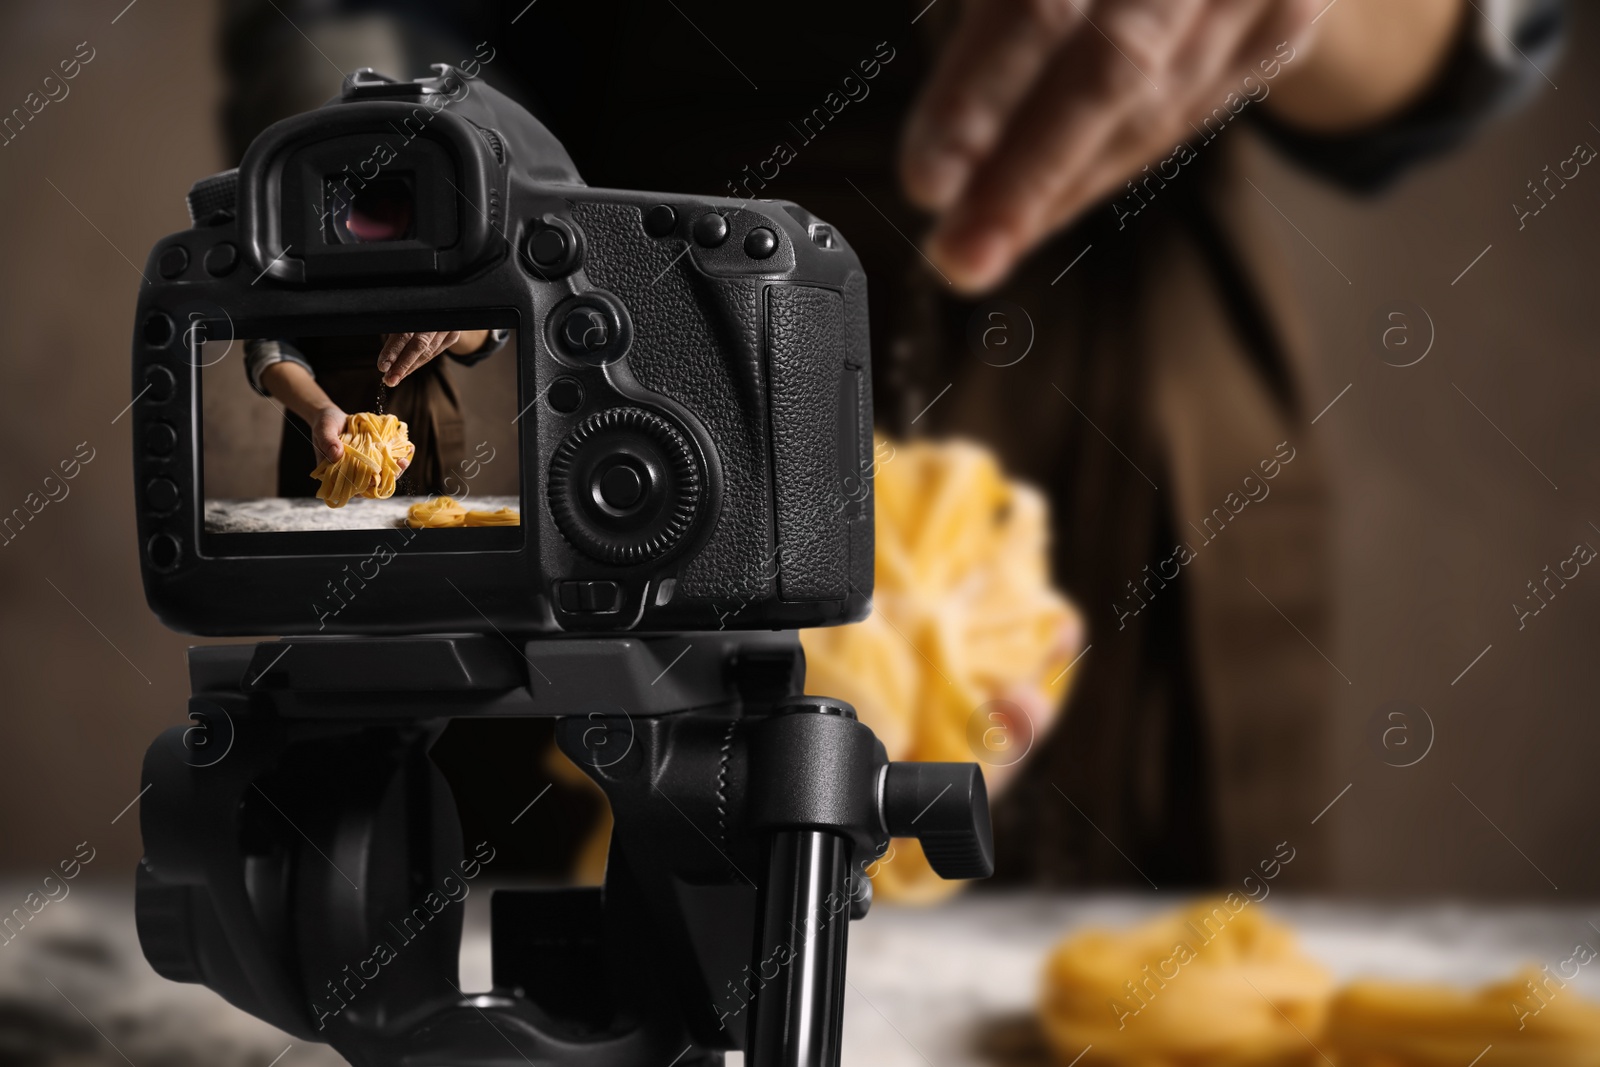 Image of Food photography. Shooting of woman making pasta, focus on camera